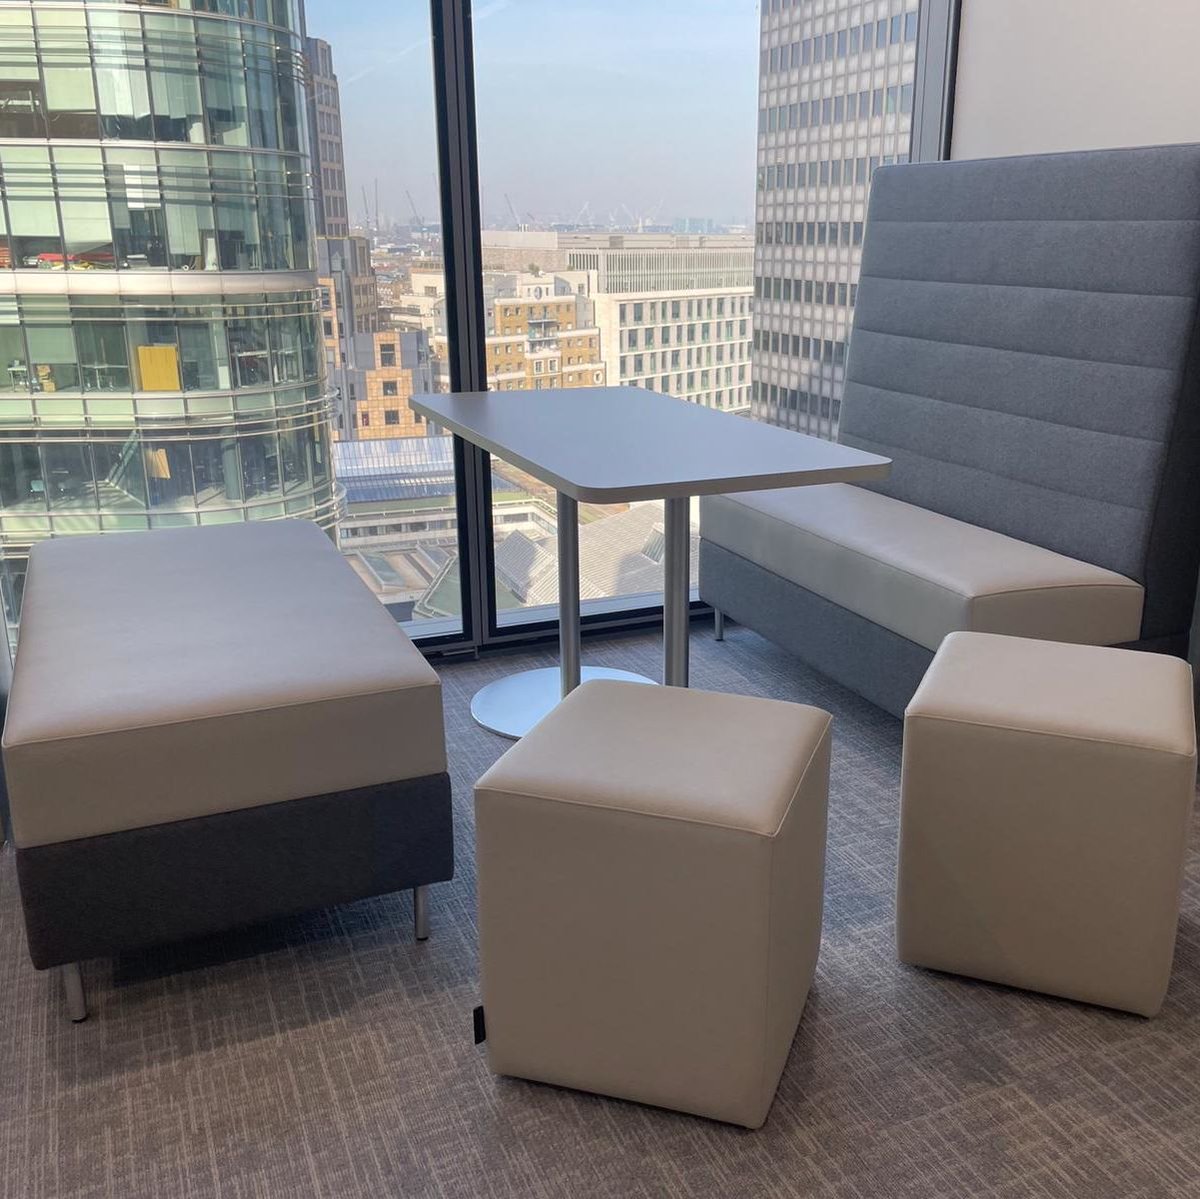 Stunning day in the city today!
With a broad range of banquette, stools and tables you can easily combine to make space for a view.
#commercialinteriors #workplace #workplaceinteriors #workplacedesign #london